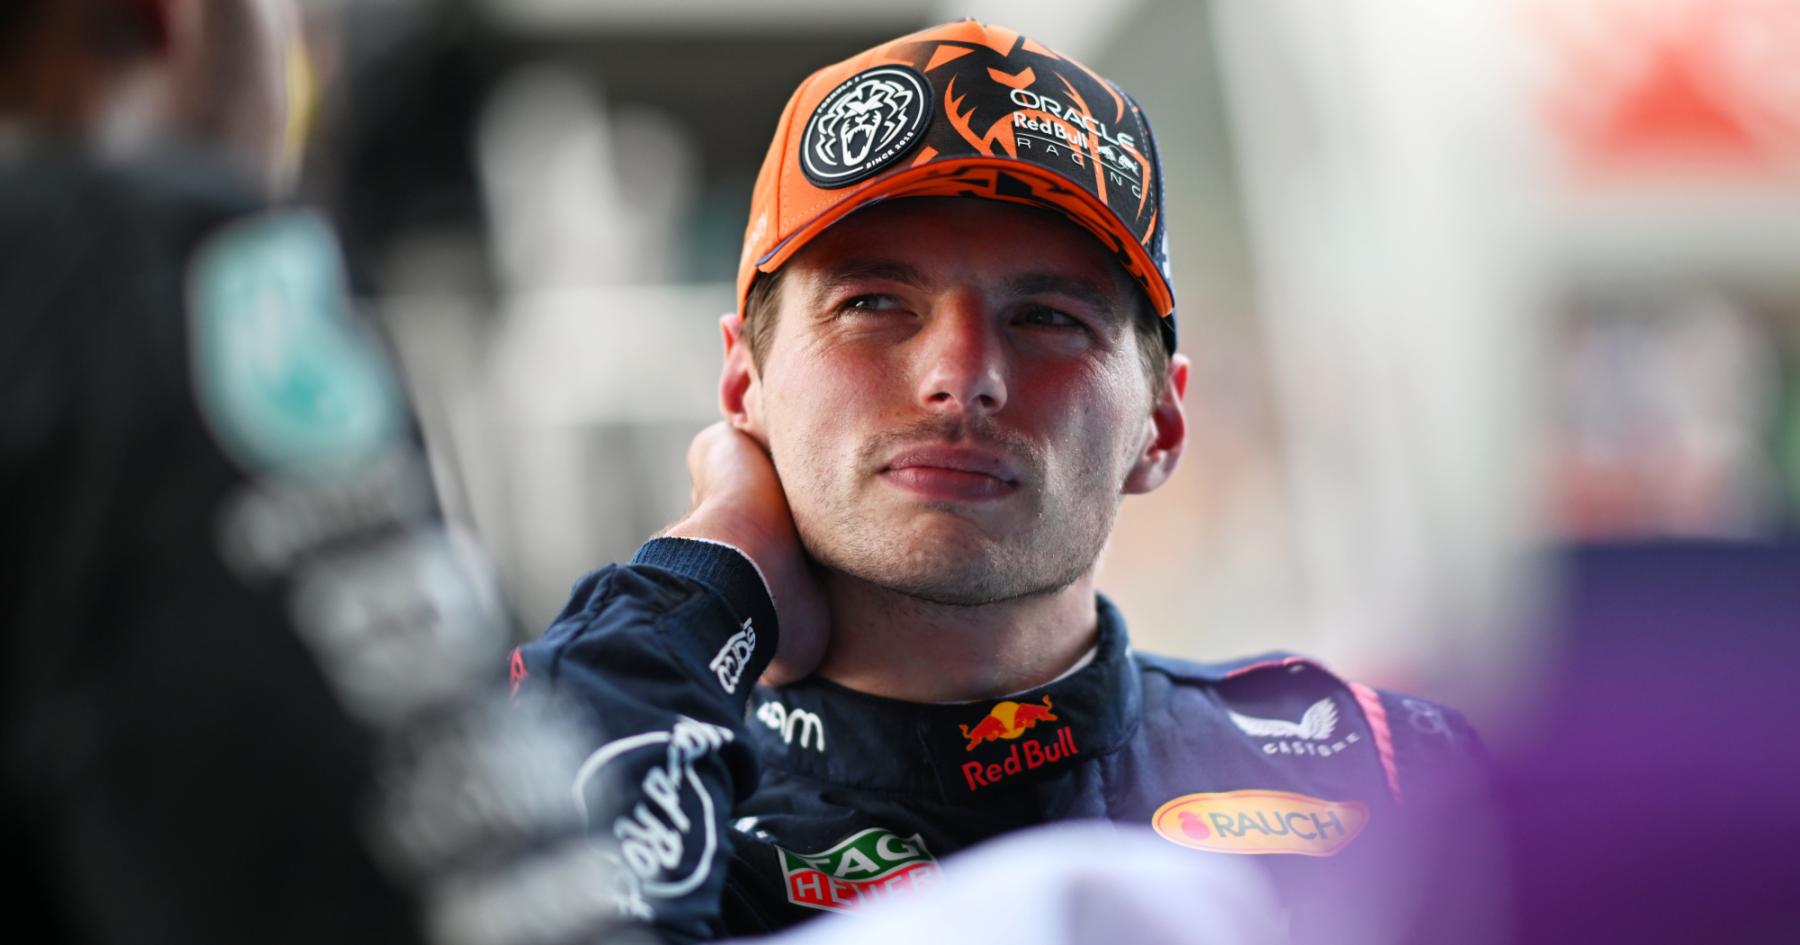 Verstappen's Focus: Red Bull Rivalries and the Pursuit of Excellence